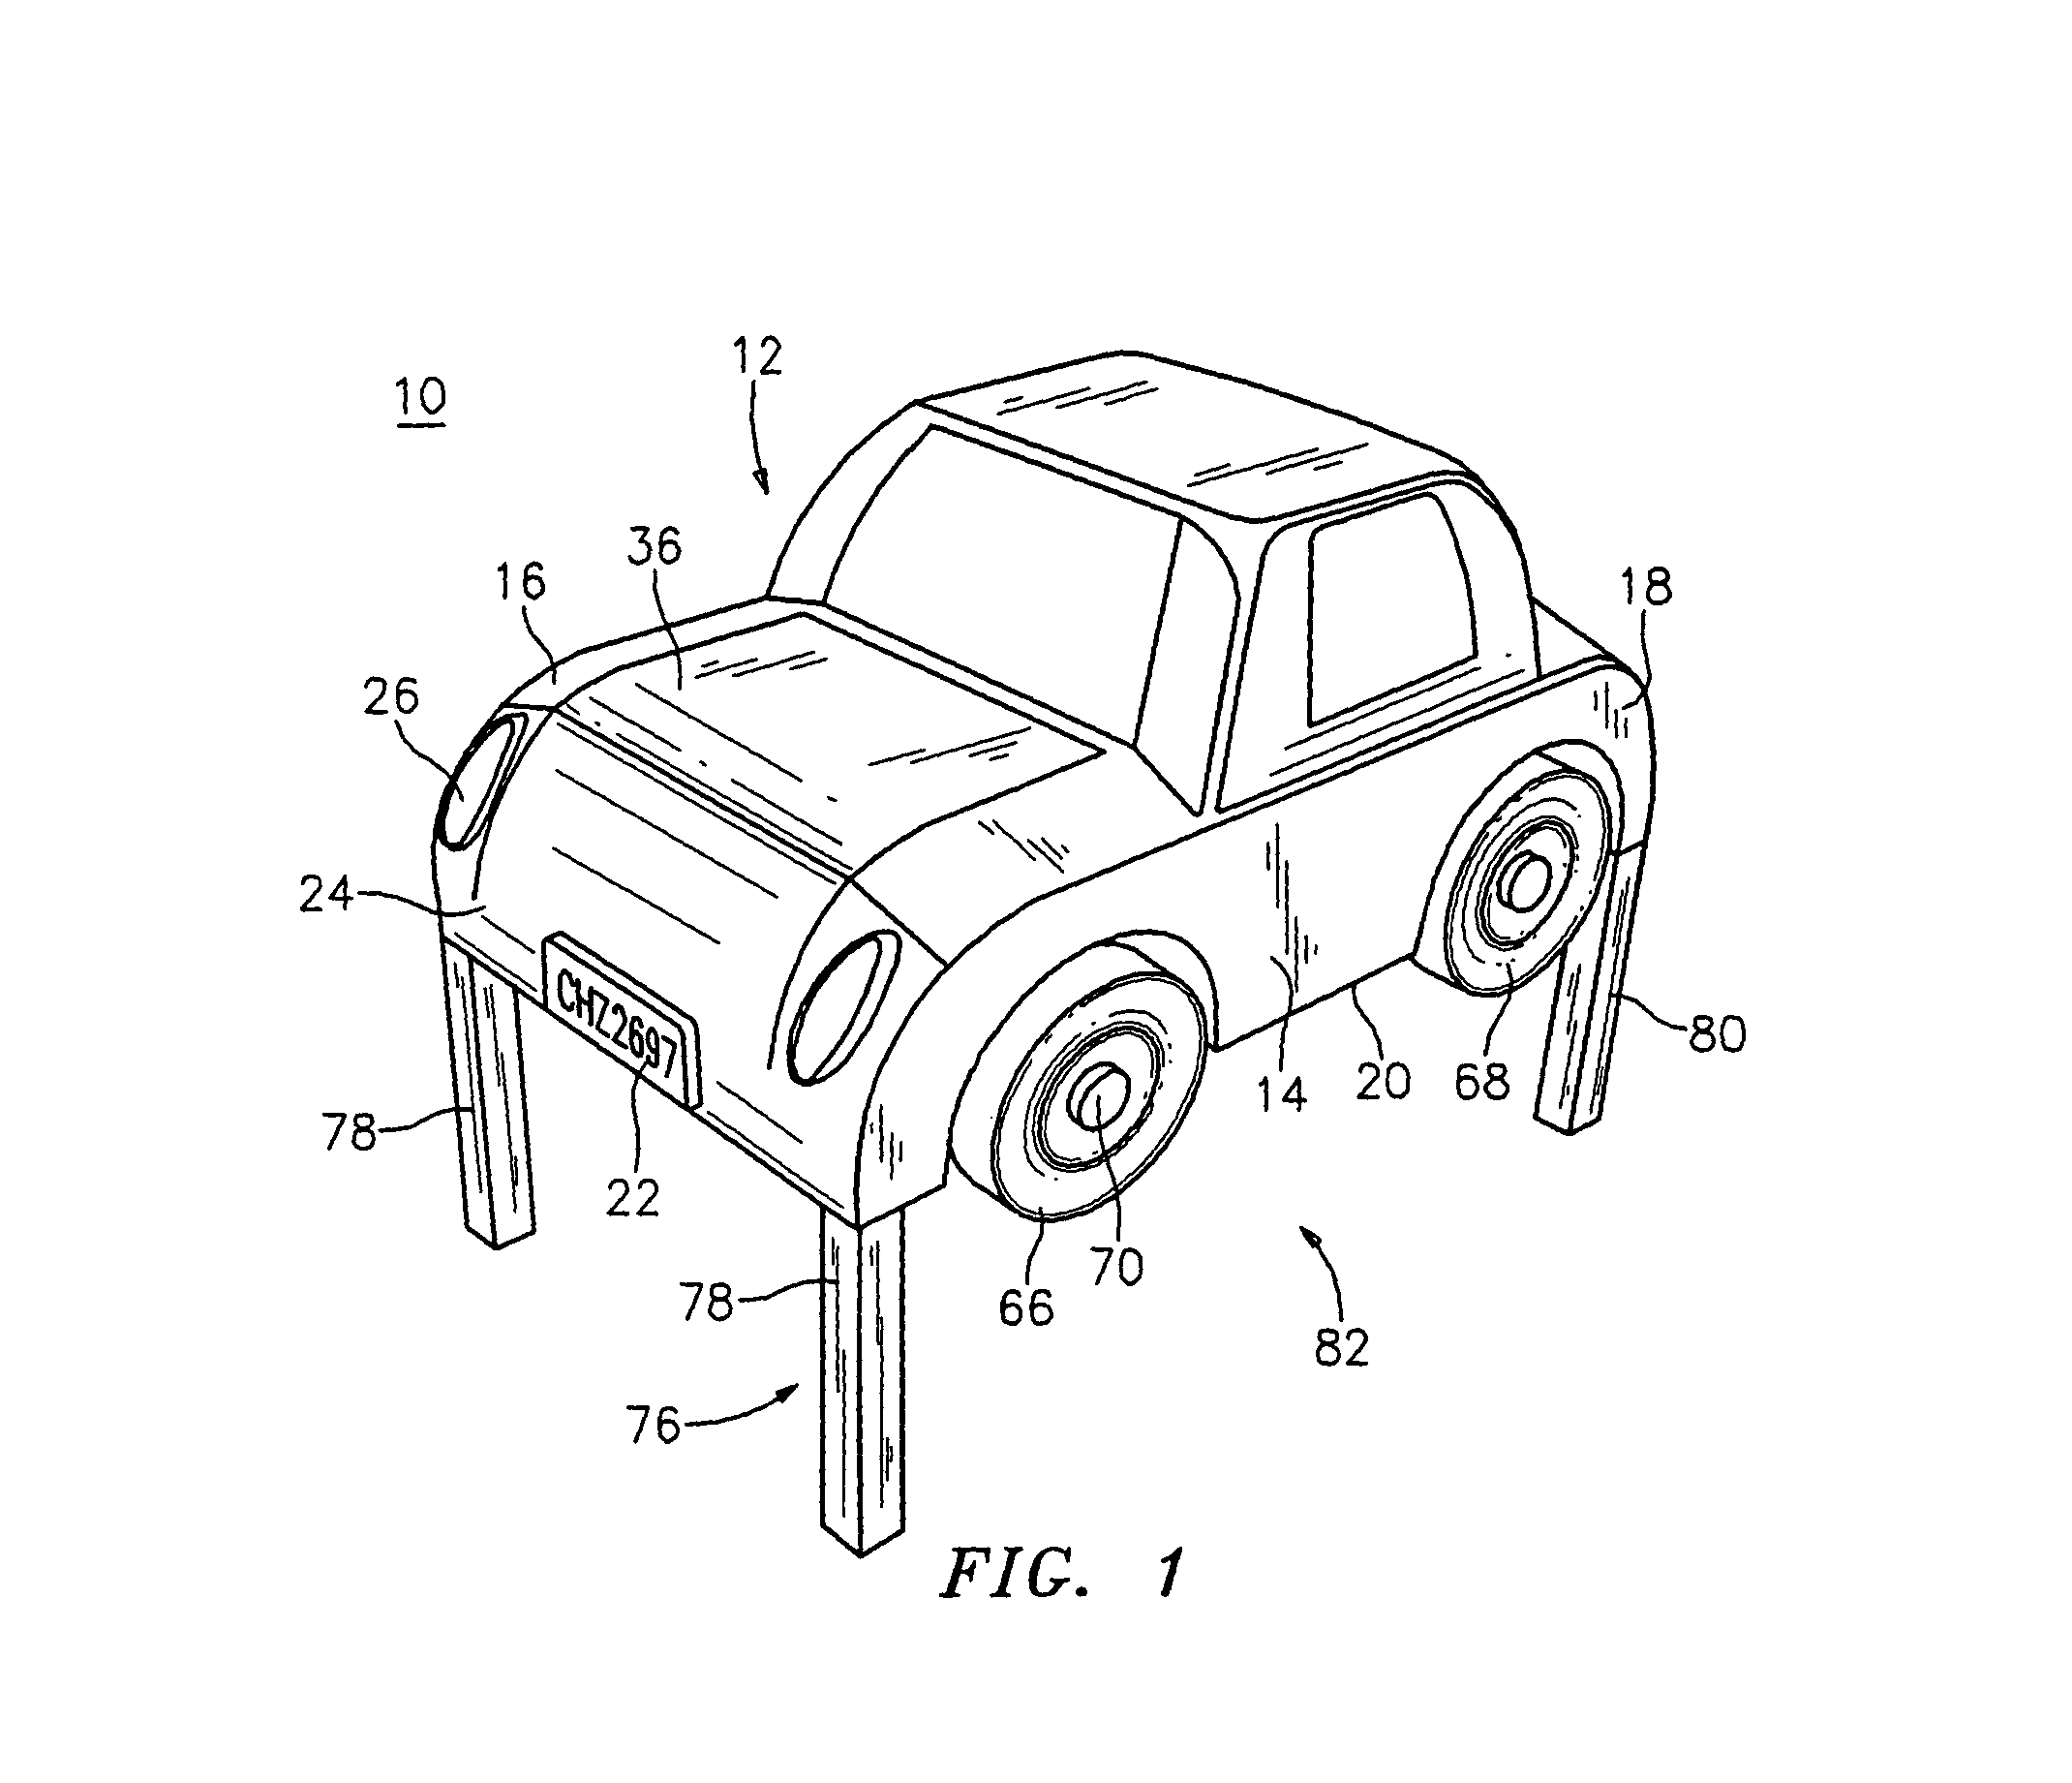 Interactive toy vehicle and methods of use